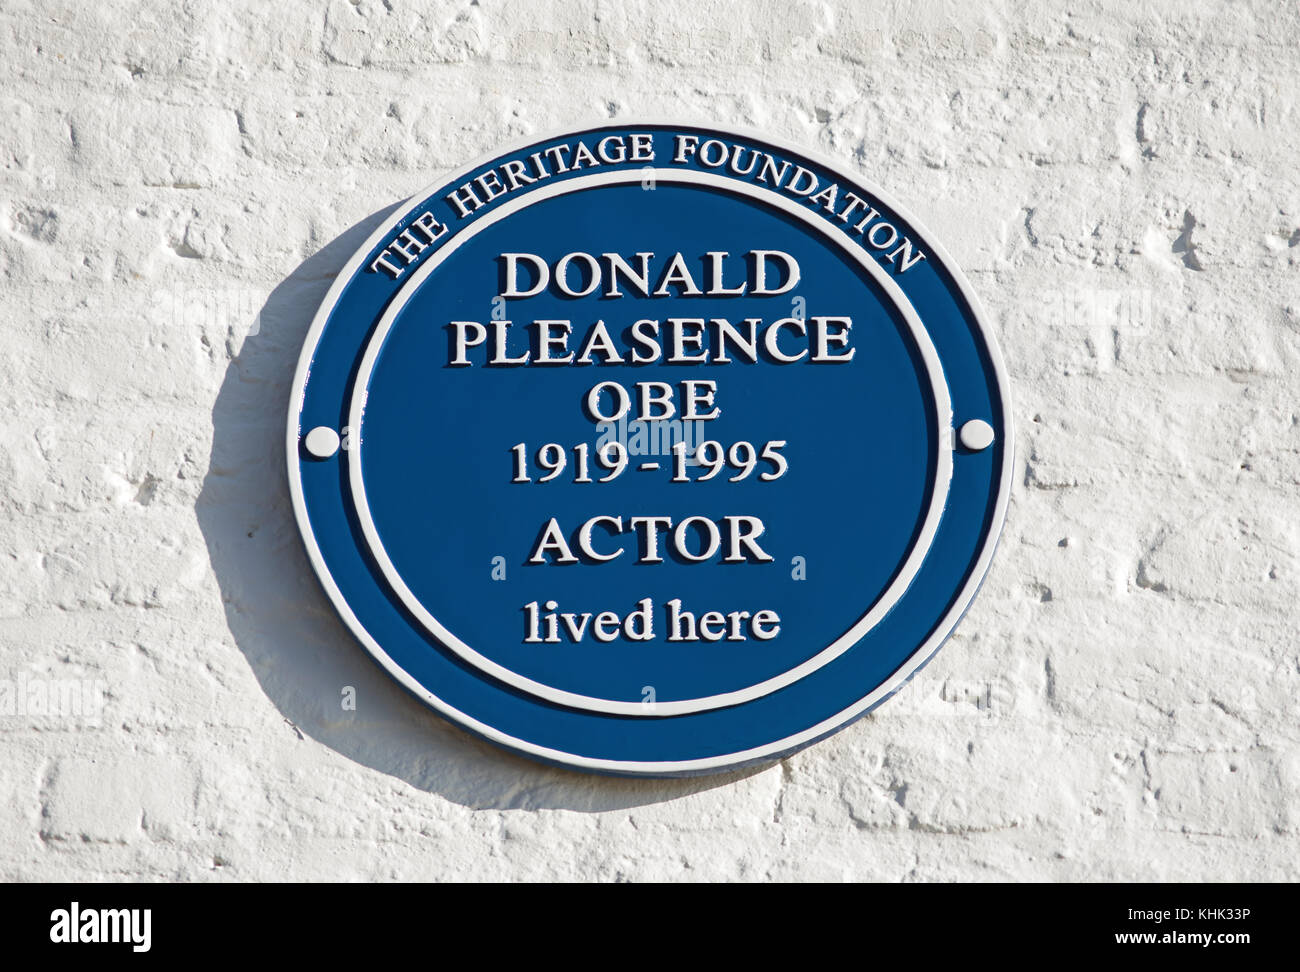 heritage foundation plaque marking a home of actor donald pleasence, strand on the green, chiswick, london, england Stock Photo